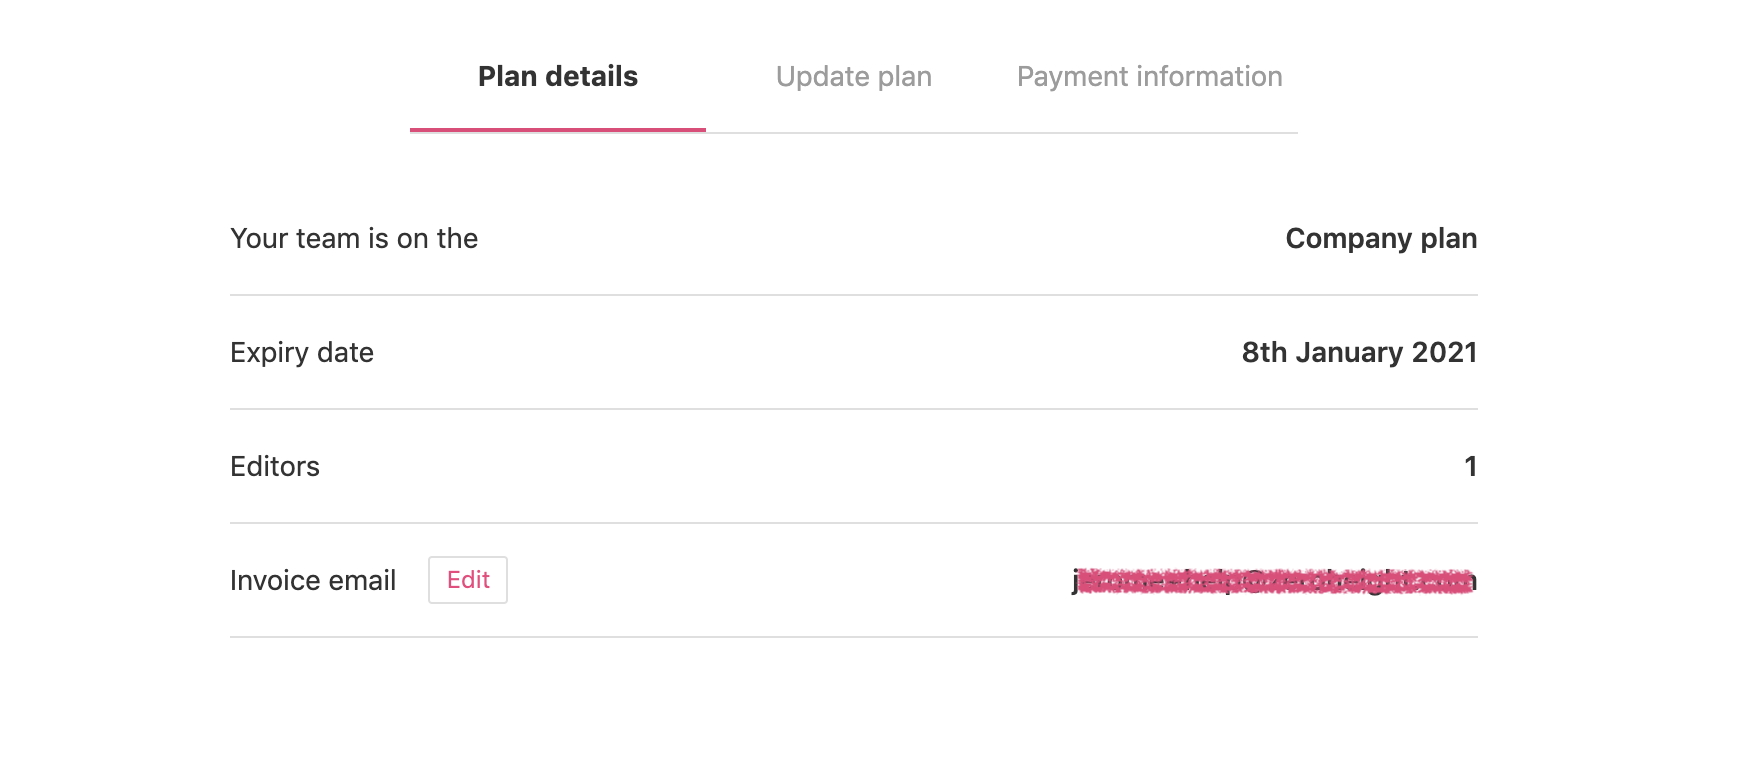 Plan details tab shows where you can edit the invoice email